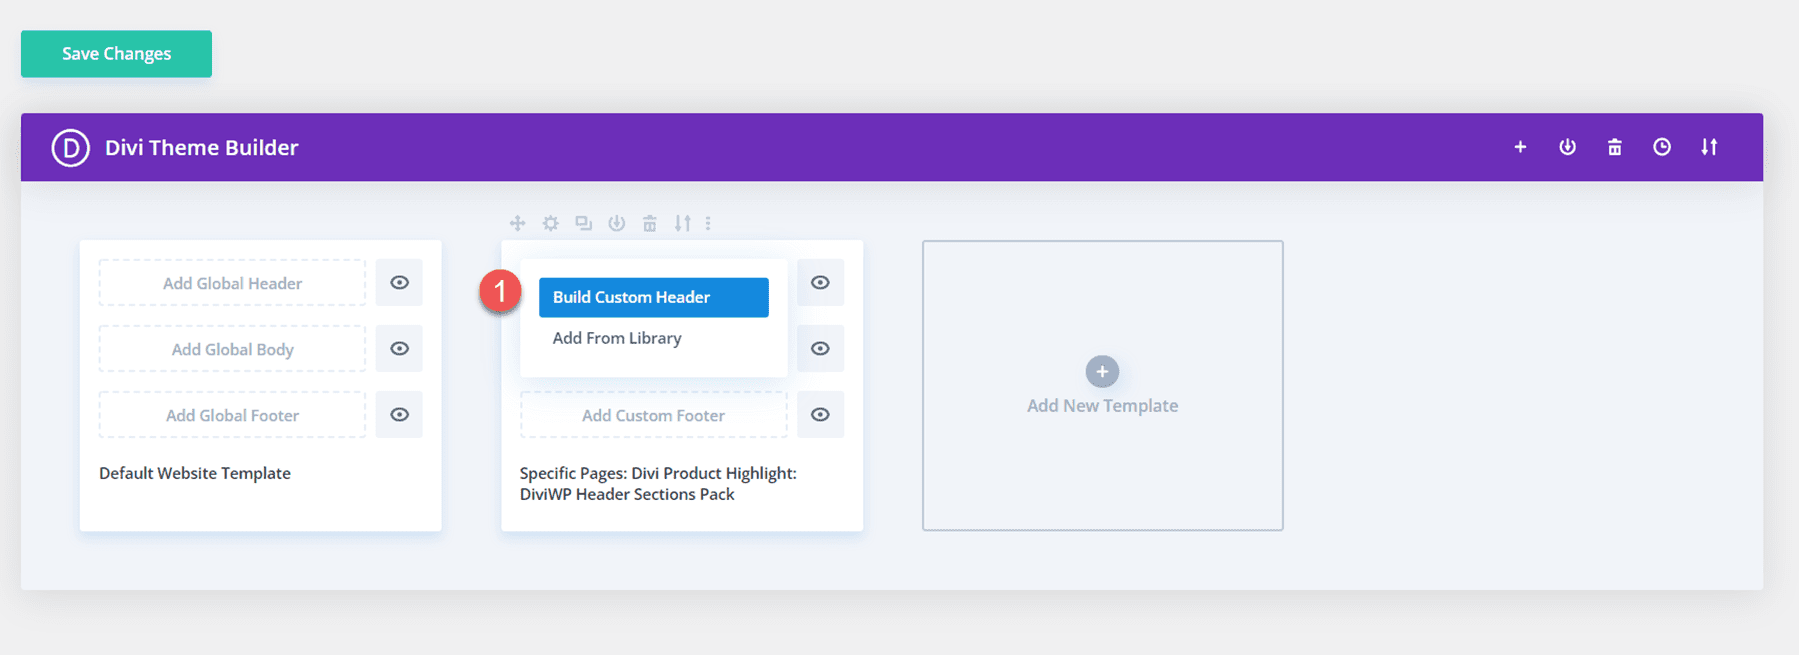 Divi Product Highlight: DiviWP Header Sections Pack Install